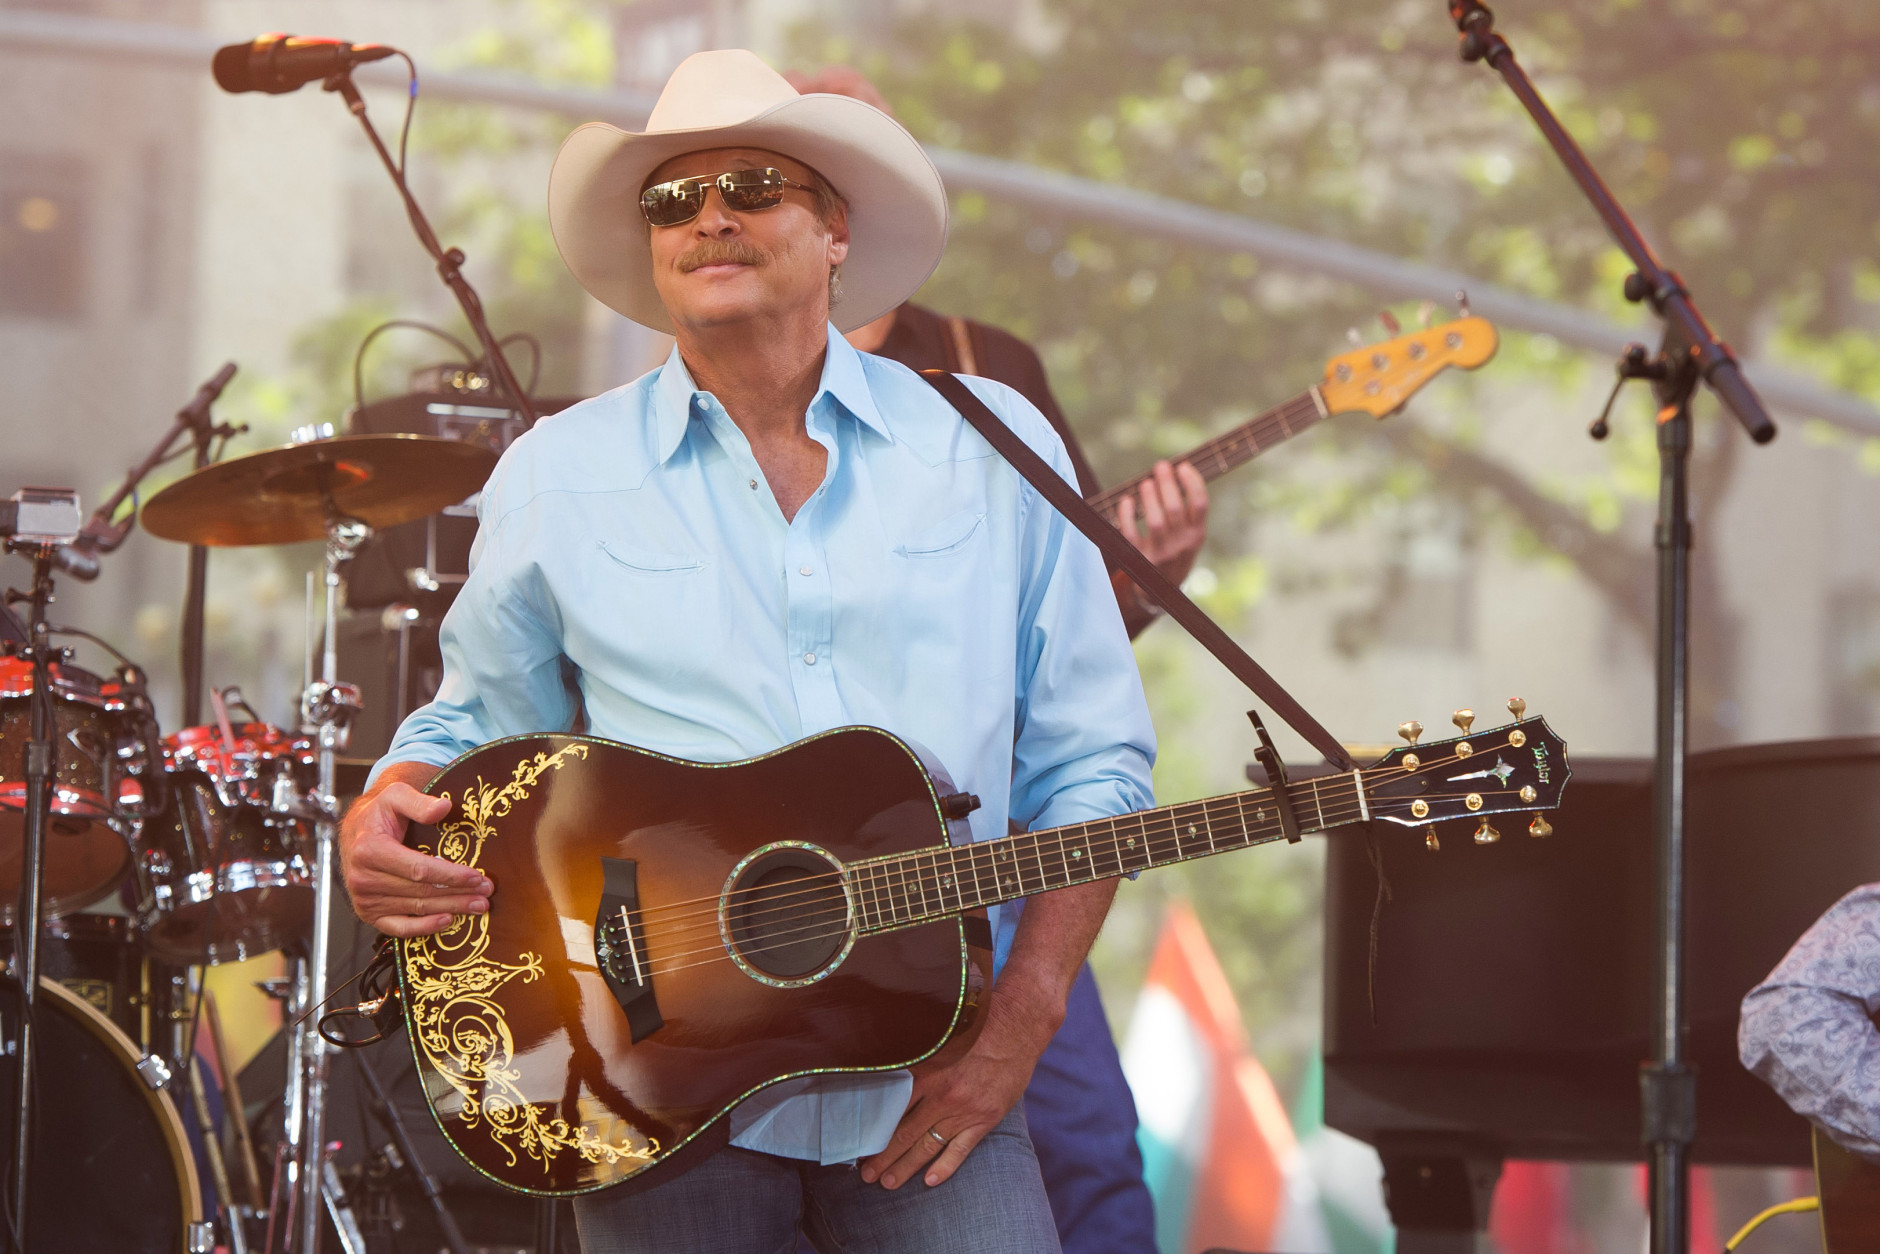 Alan Jackson performs on NBC's "Today" show on Friday, July 17, 2015, in New York. (Photo by Charles Sykes/Invision/AP)